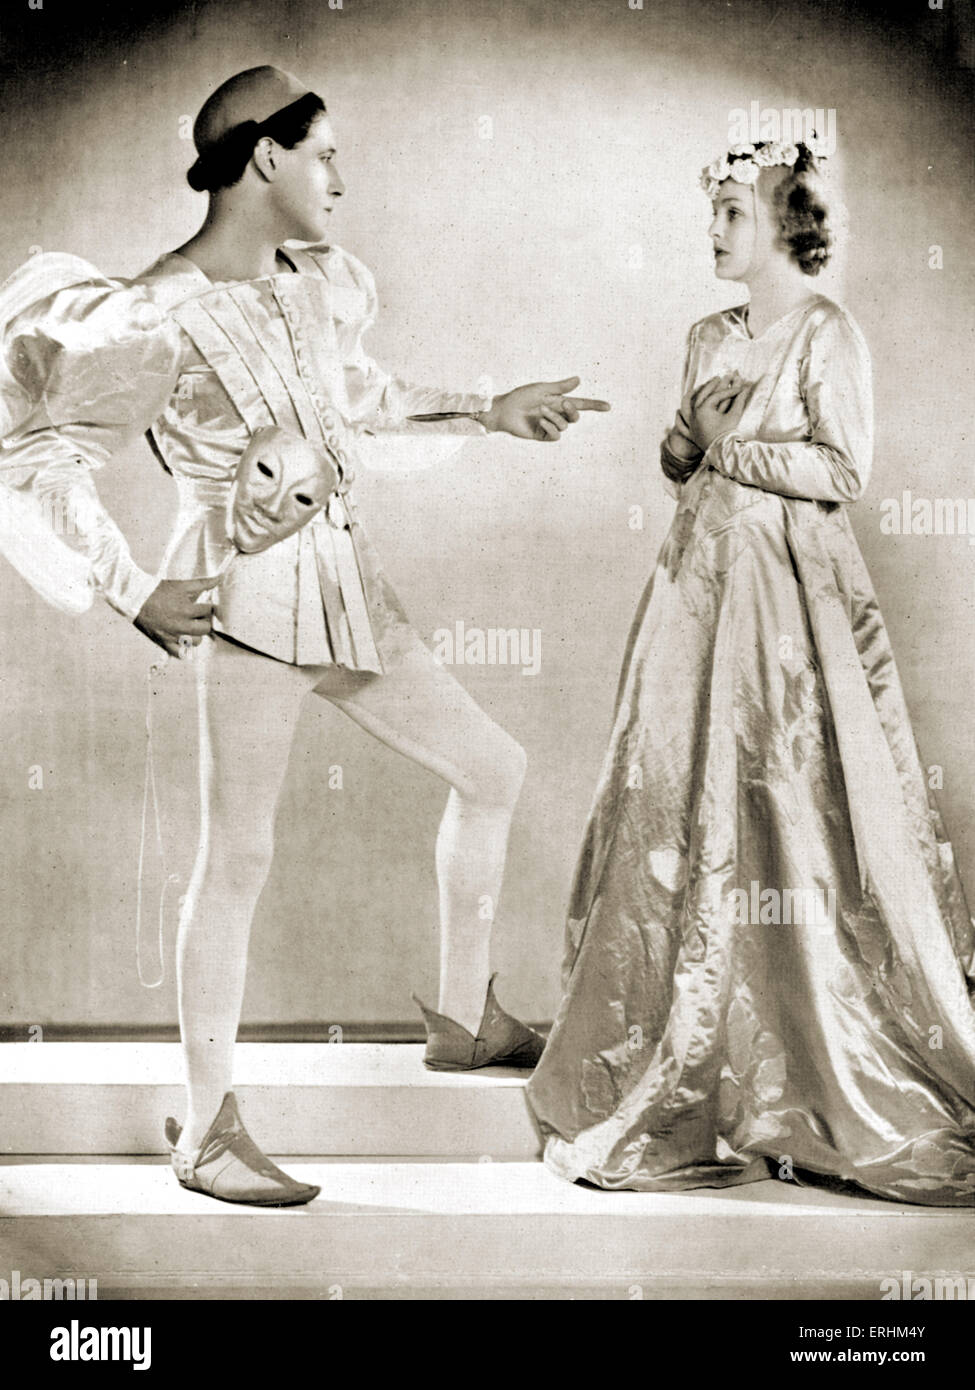 Ivor Novello as 'Romeo' & Joan Barry as 'Juliet' in the masque of 'Romeo & Juliet', London 1933. IN, Welsh actor & singer: 15 Stock Photo